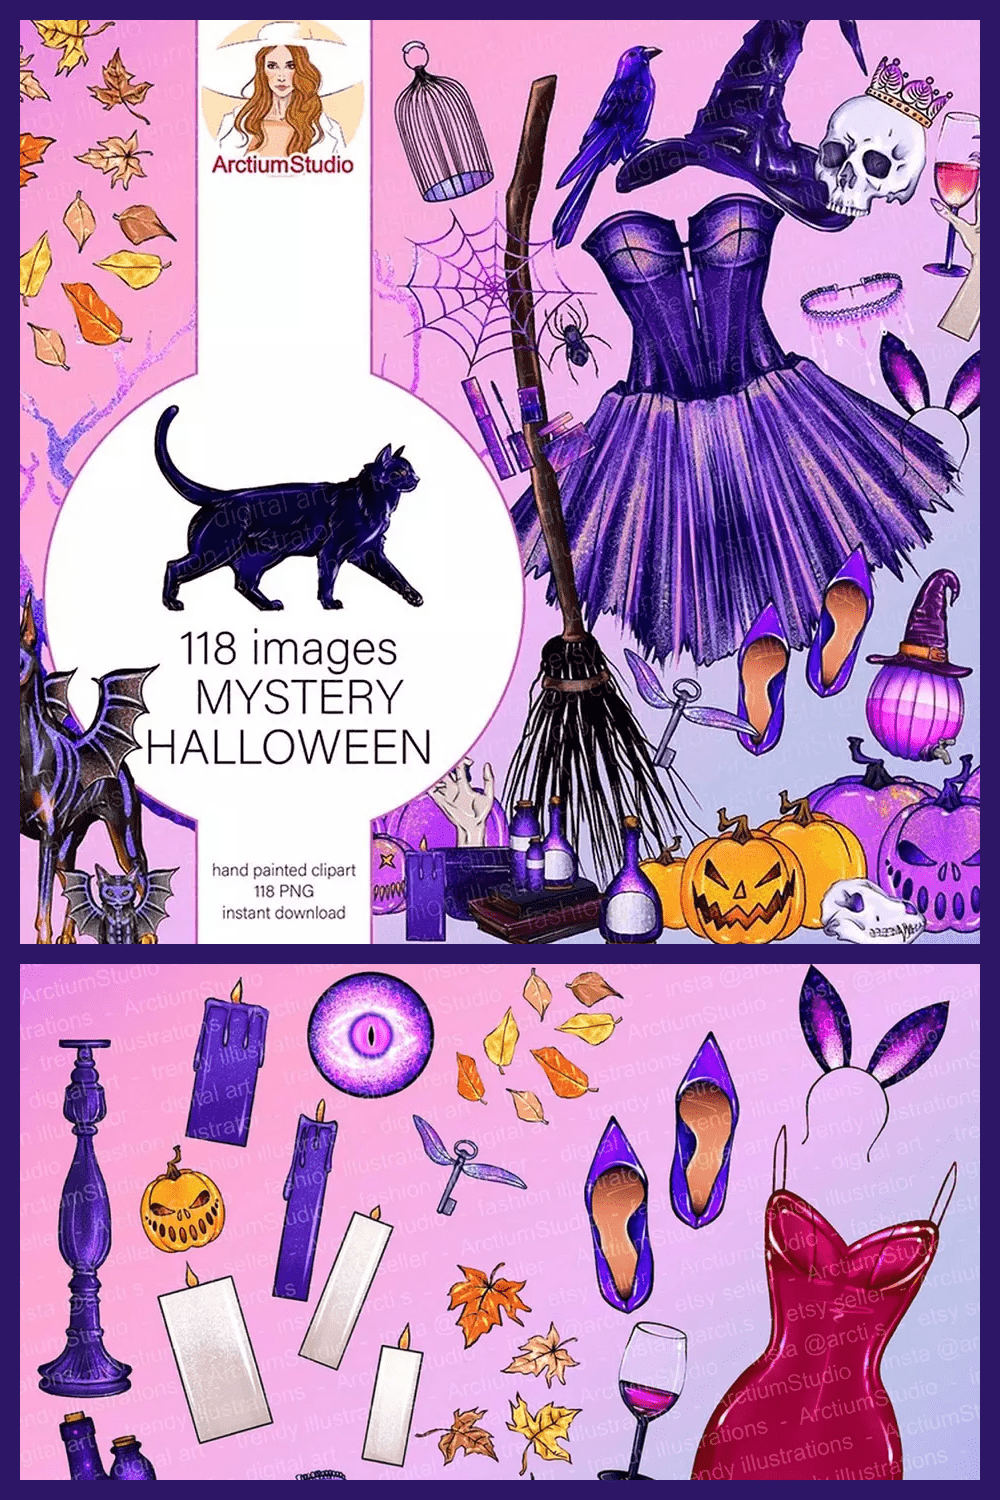 Purple witch dress, broom, cat, pumpkins, candles on a pink background.